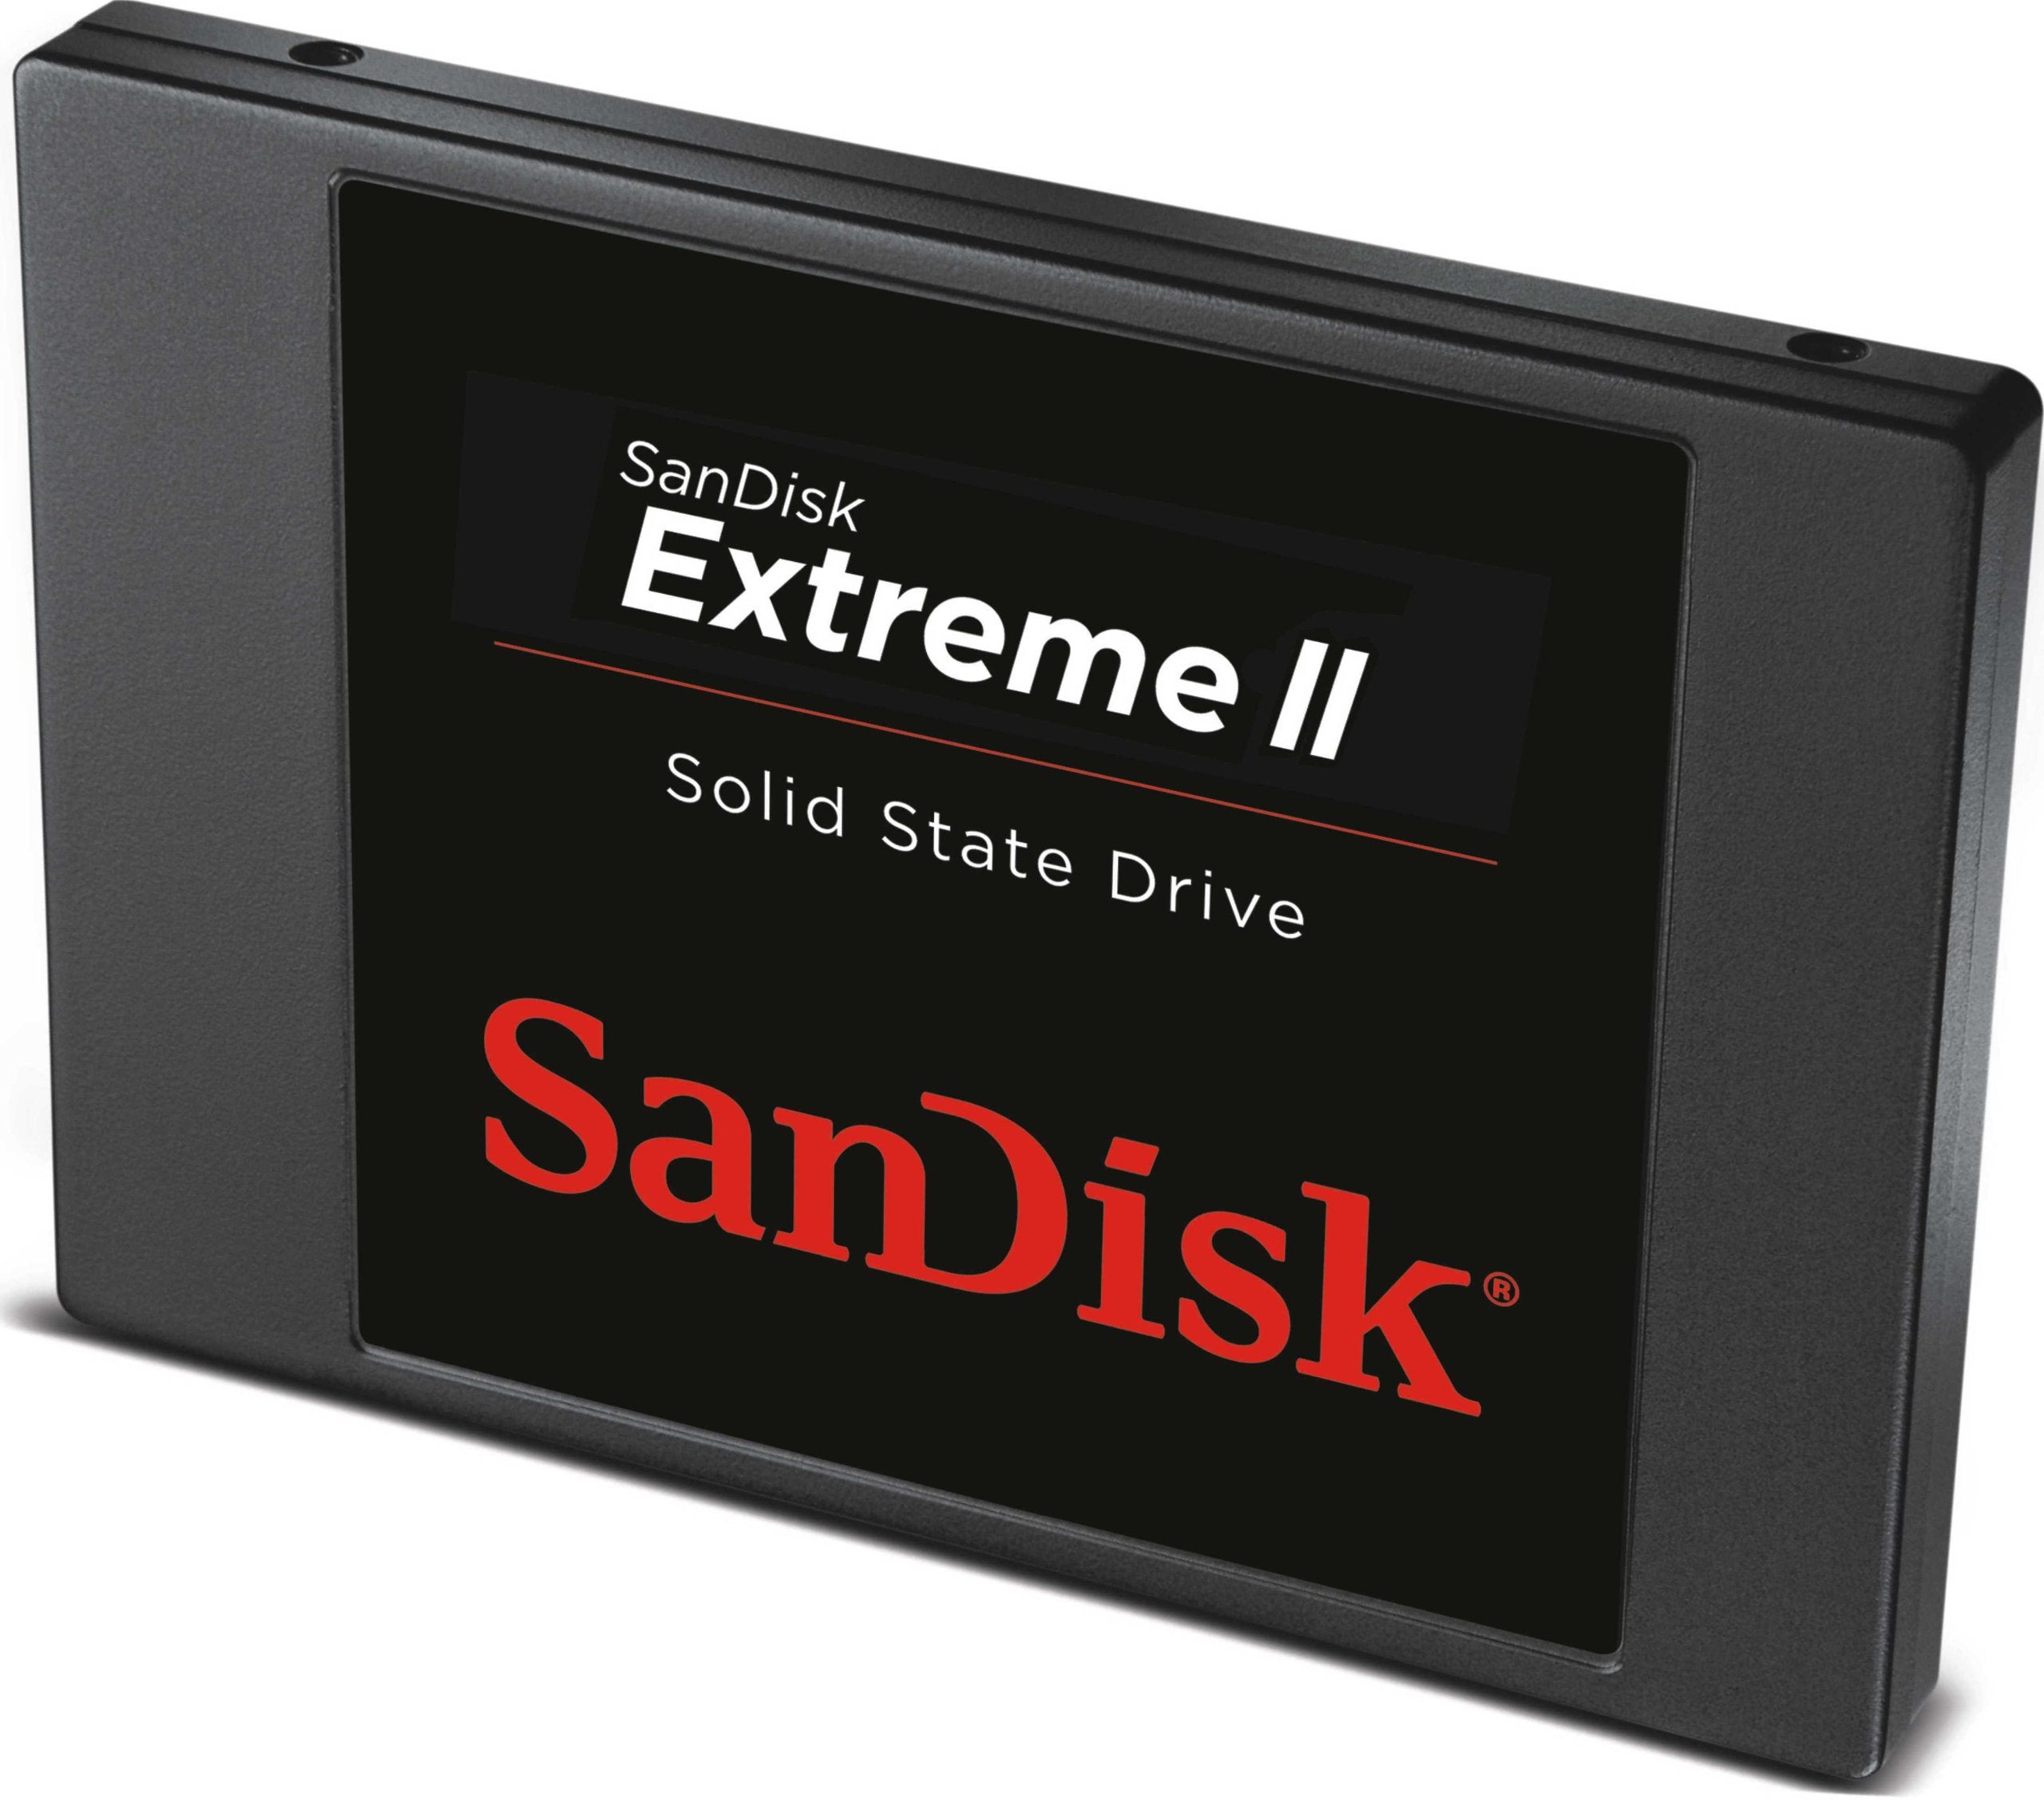 SanDisk Extreme II 240GB SATA 6.0GB/s 2.5-Inch 7mm Height Solid State Drive (SSD) With Read Up To 550MB/s & Up To 95K IOPS- SDSSDXP-240G-G25